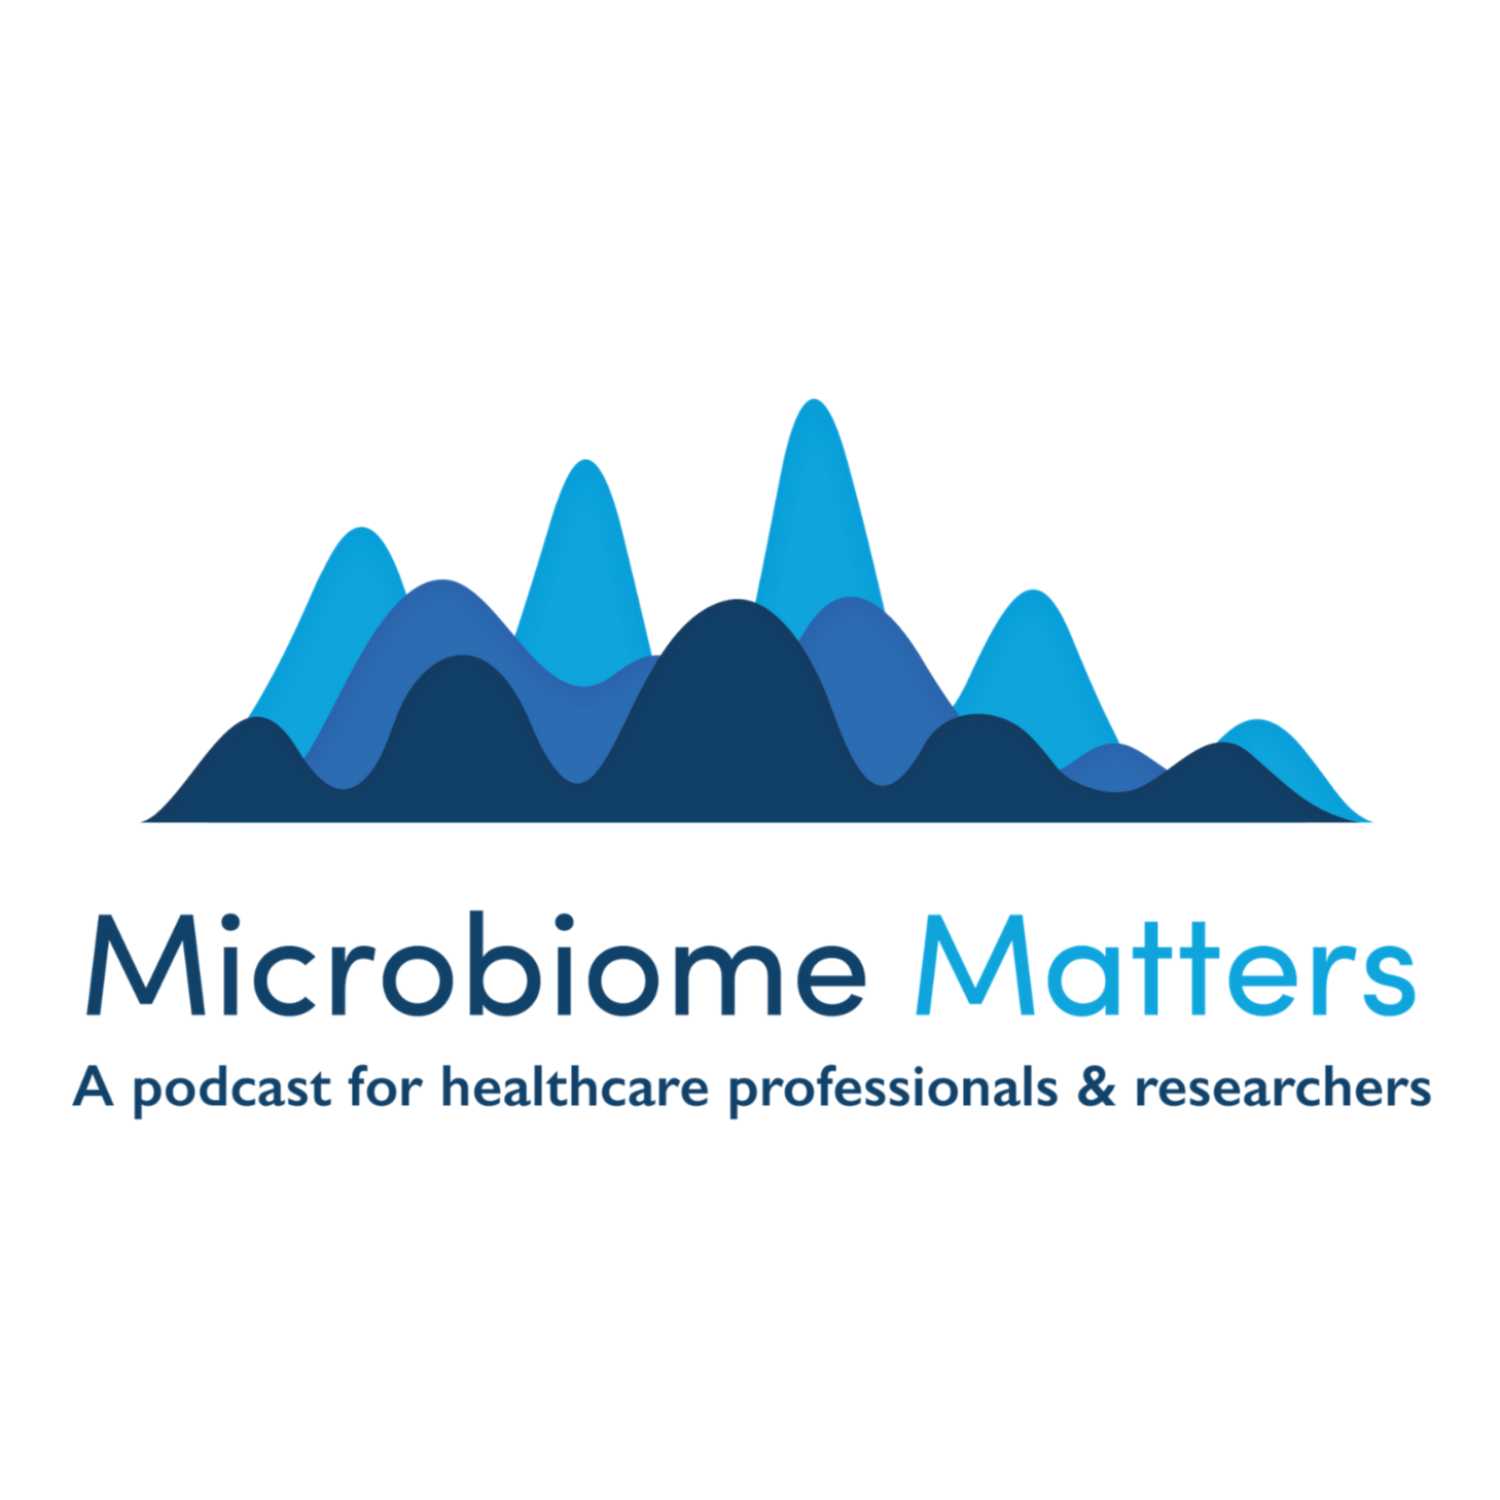 S2E4: Emerging Dietary Components and their Impact on the Gut Microbiota [with Prof Tim Spector]